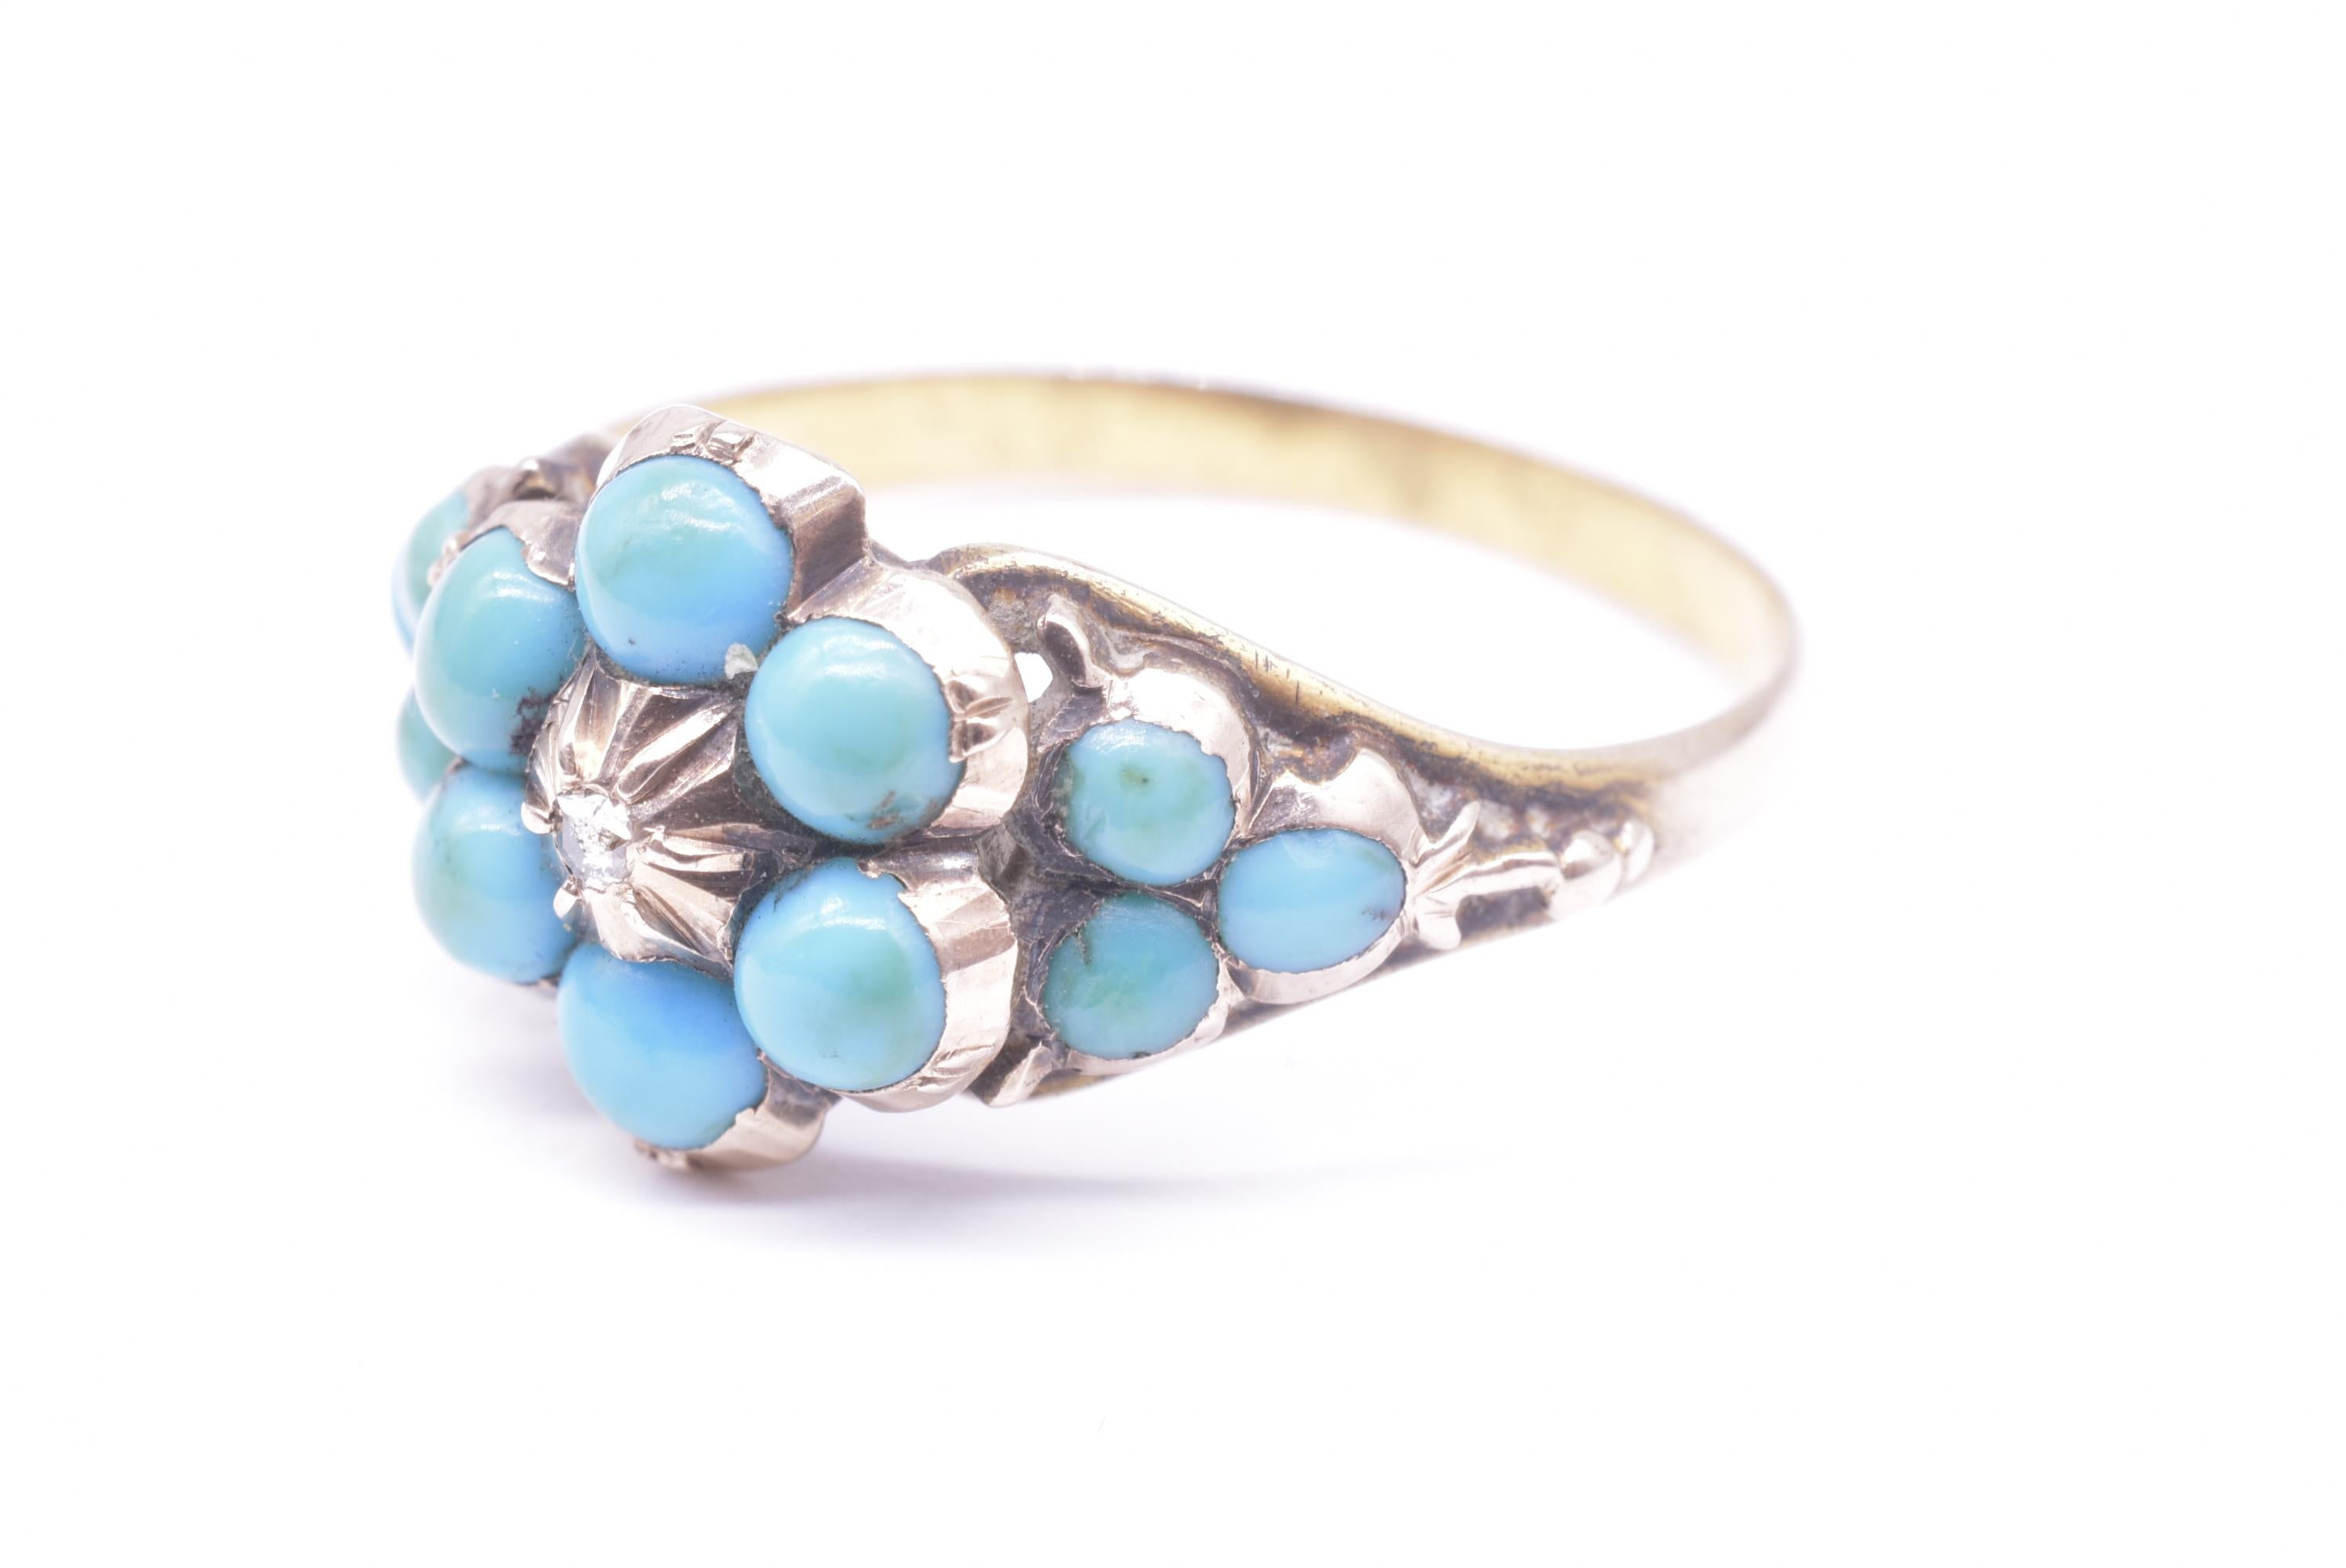 Victorian Forget Me Not ring 15K set with six turquoise stones surrounding a single diamond at the center and 3 supporting turquoises on each side. The flower literally means “forget me not” and the small rose diamond in the centre signifies eternal